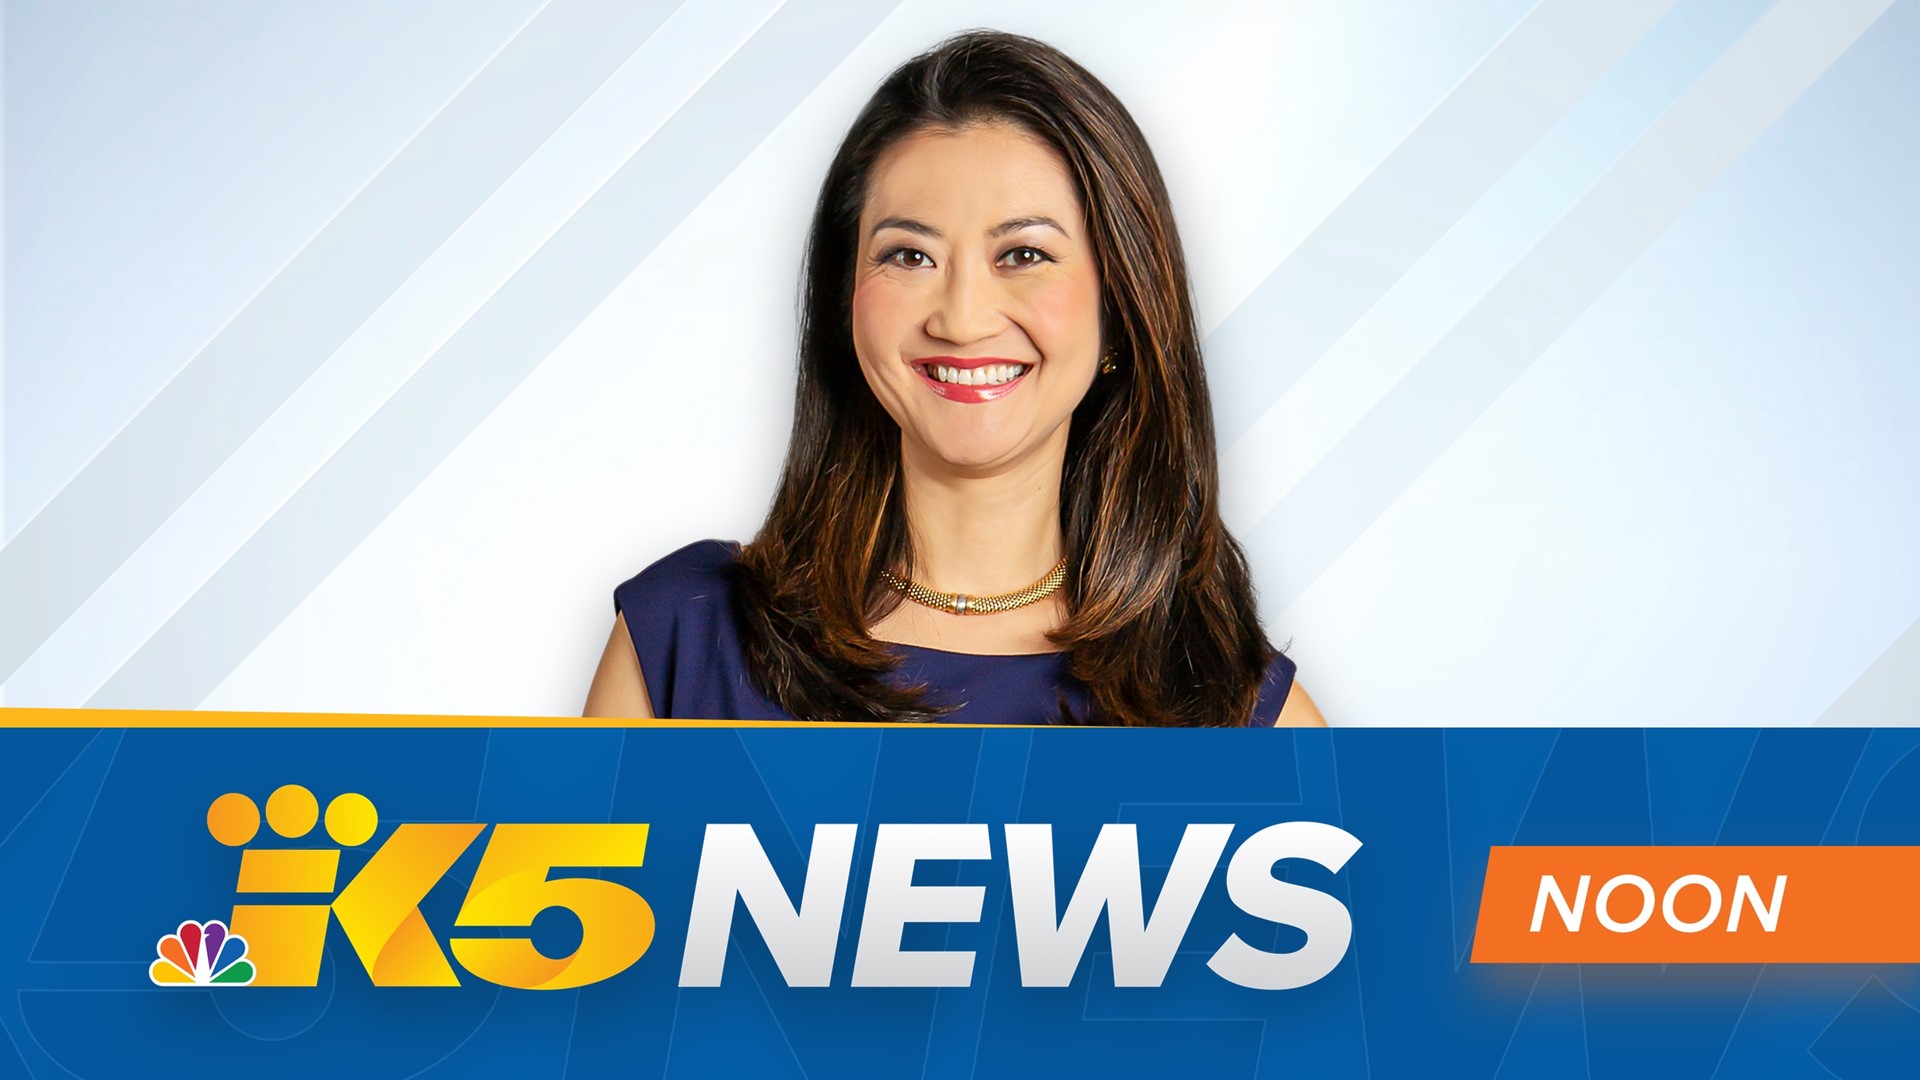 The KING 5 News Team offers an in-depth look at news of the morning as well as timely updates on business, sports, weather conditions and traffic.